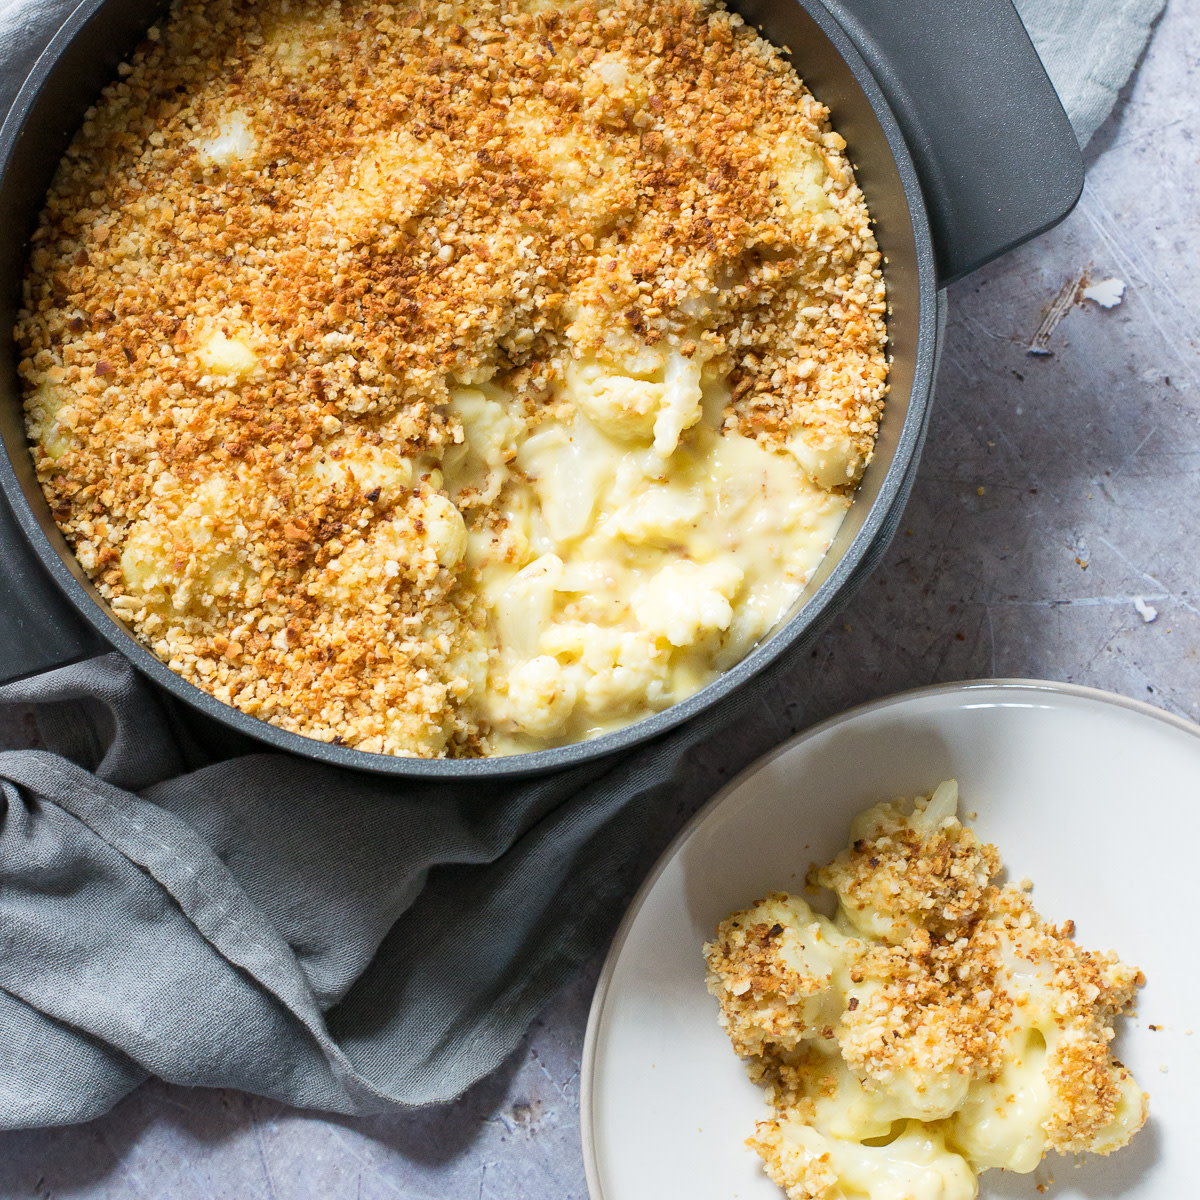 🌱 VEGAN CAULIFLOWER CHEESE 
This gooey baked vegan cauliflower cheese is the ultimate vegan comfort food, with a crispy breadcrumb topping. Easy to make with a rich creamy sauce. thevegspace.co.uk/recipe-caulifl… #Veganuary #Vegan